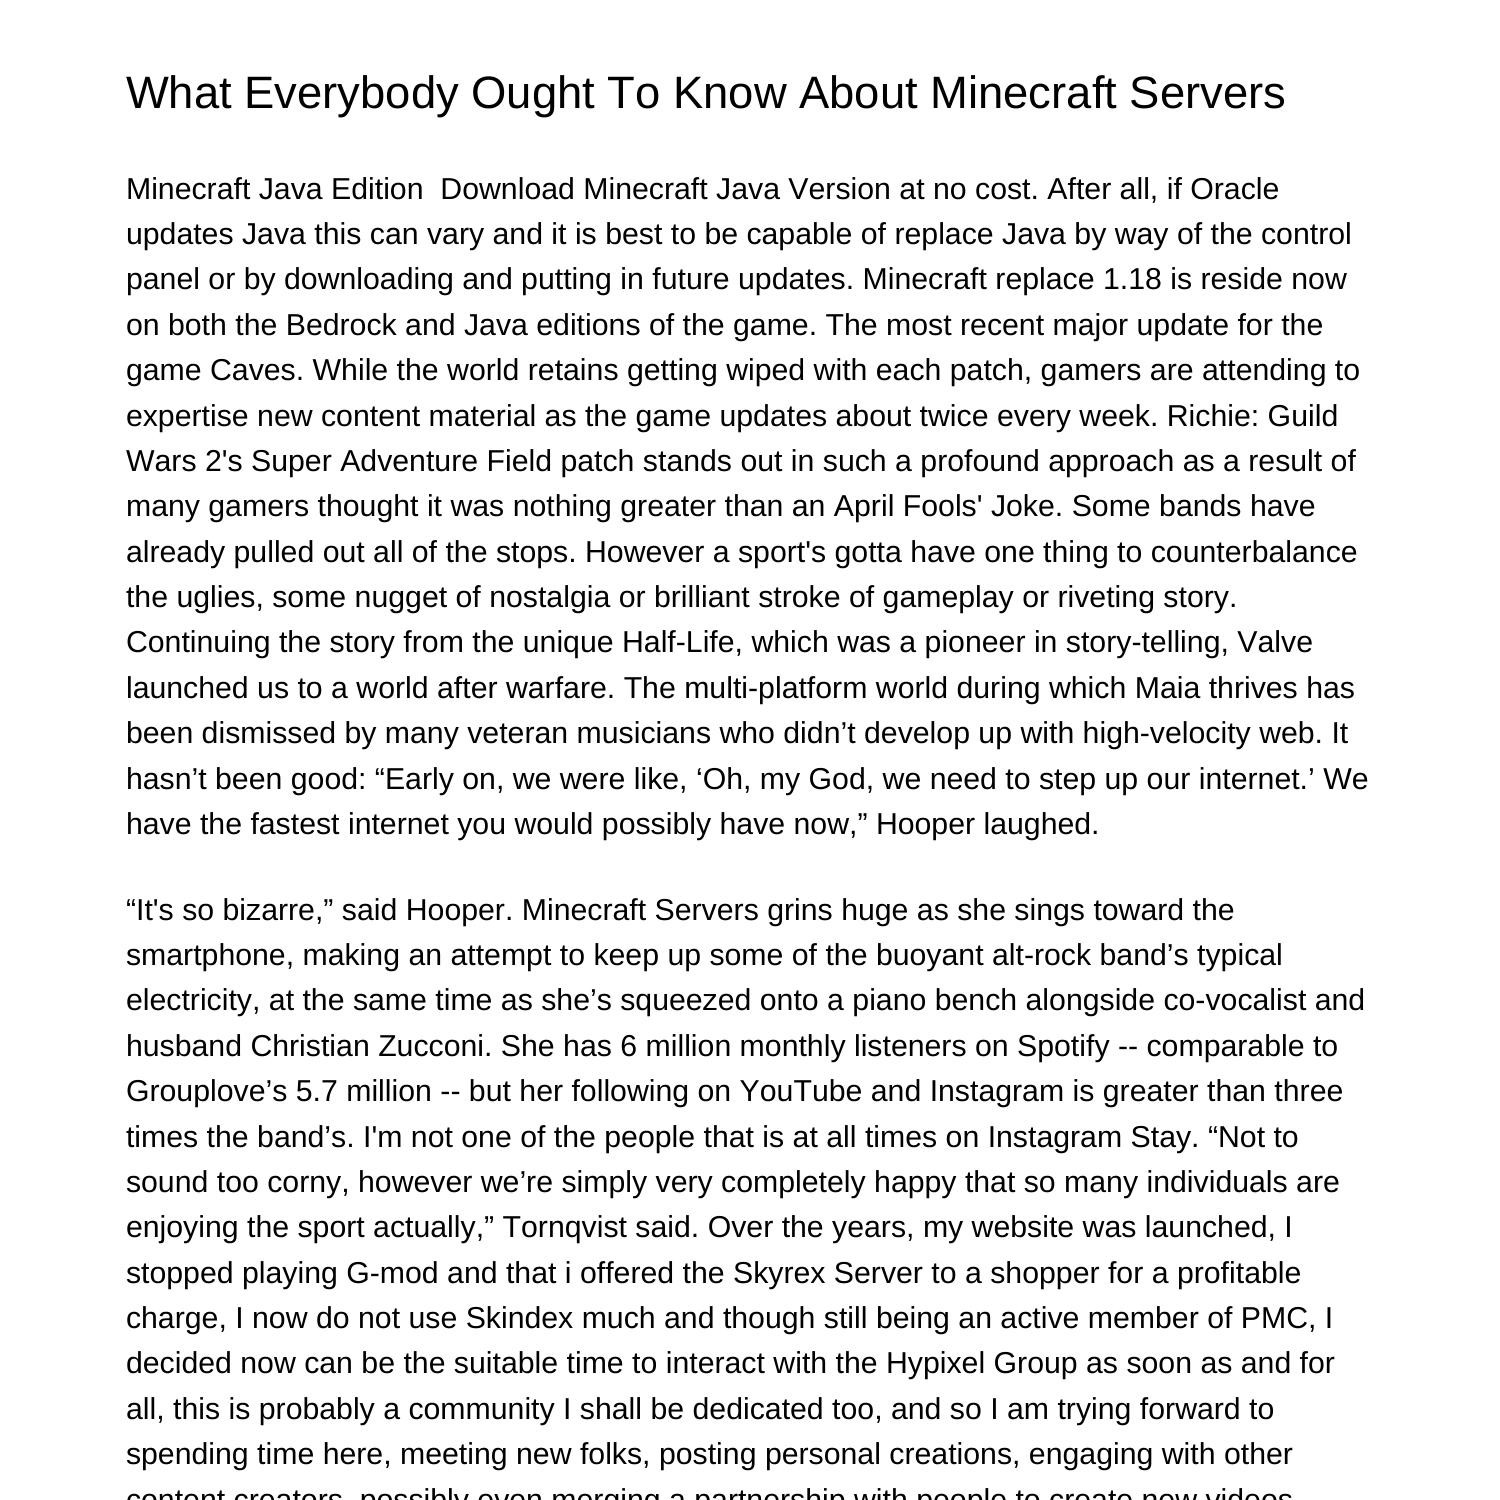 What Everybody Ought To Know About Minecraft Serversnboodpdfpdf